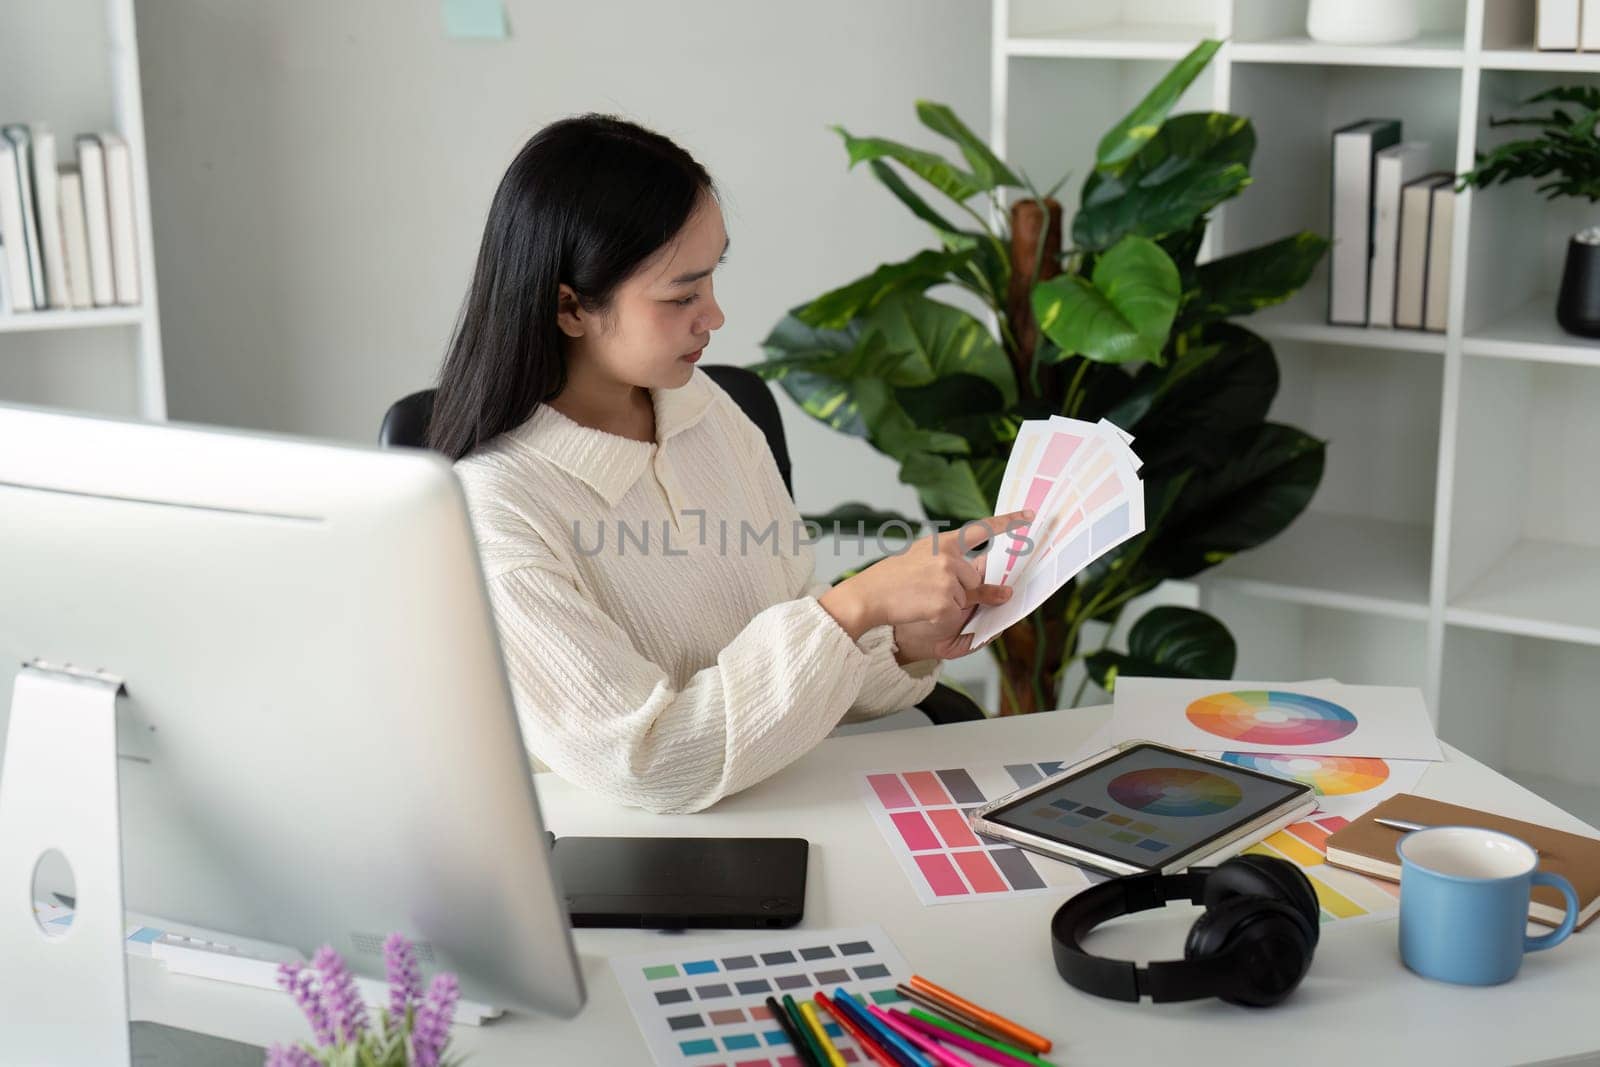 Asian woman freelance graphic designer working with color swatch samples and computer at desk in home office, young lady choosing color gamma for new design project by nateemee